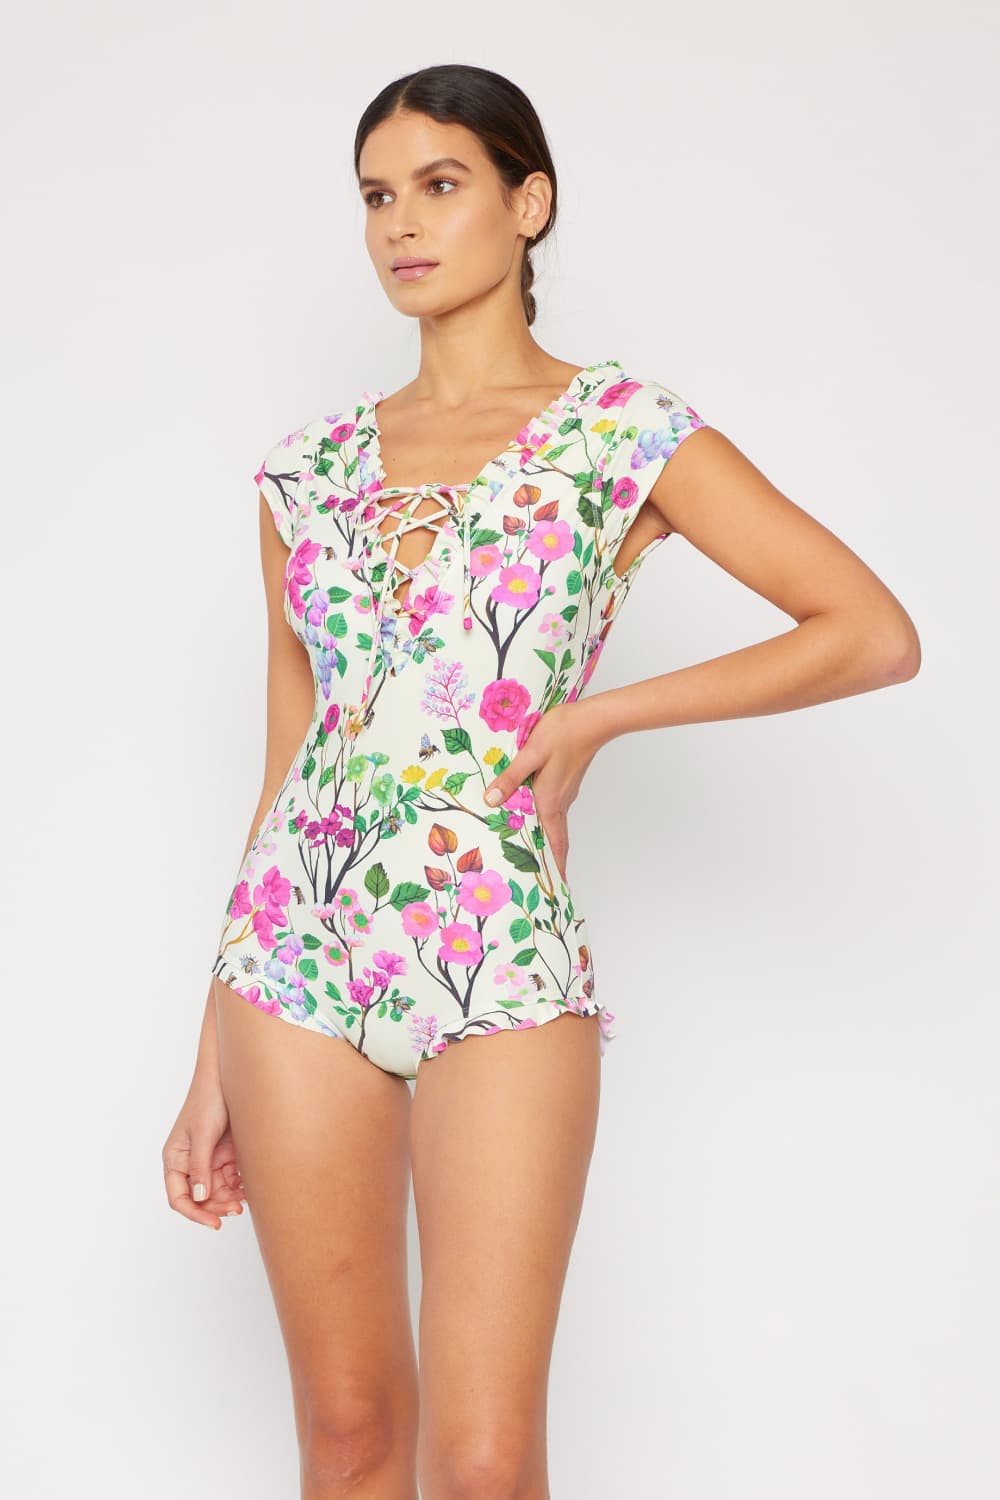 Mommy & Me Bring Me Flowers Swimsuit in Cream - Womens *FINAL SALE*